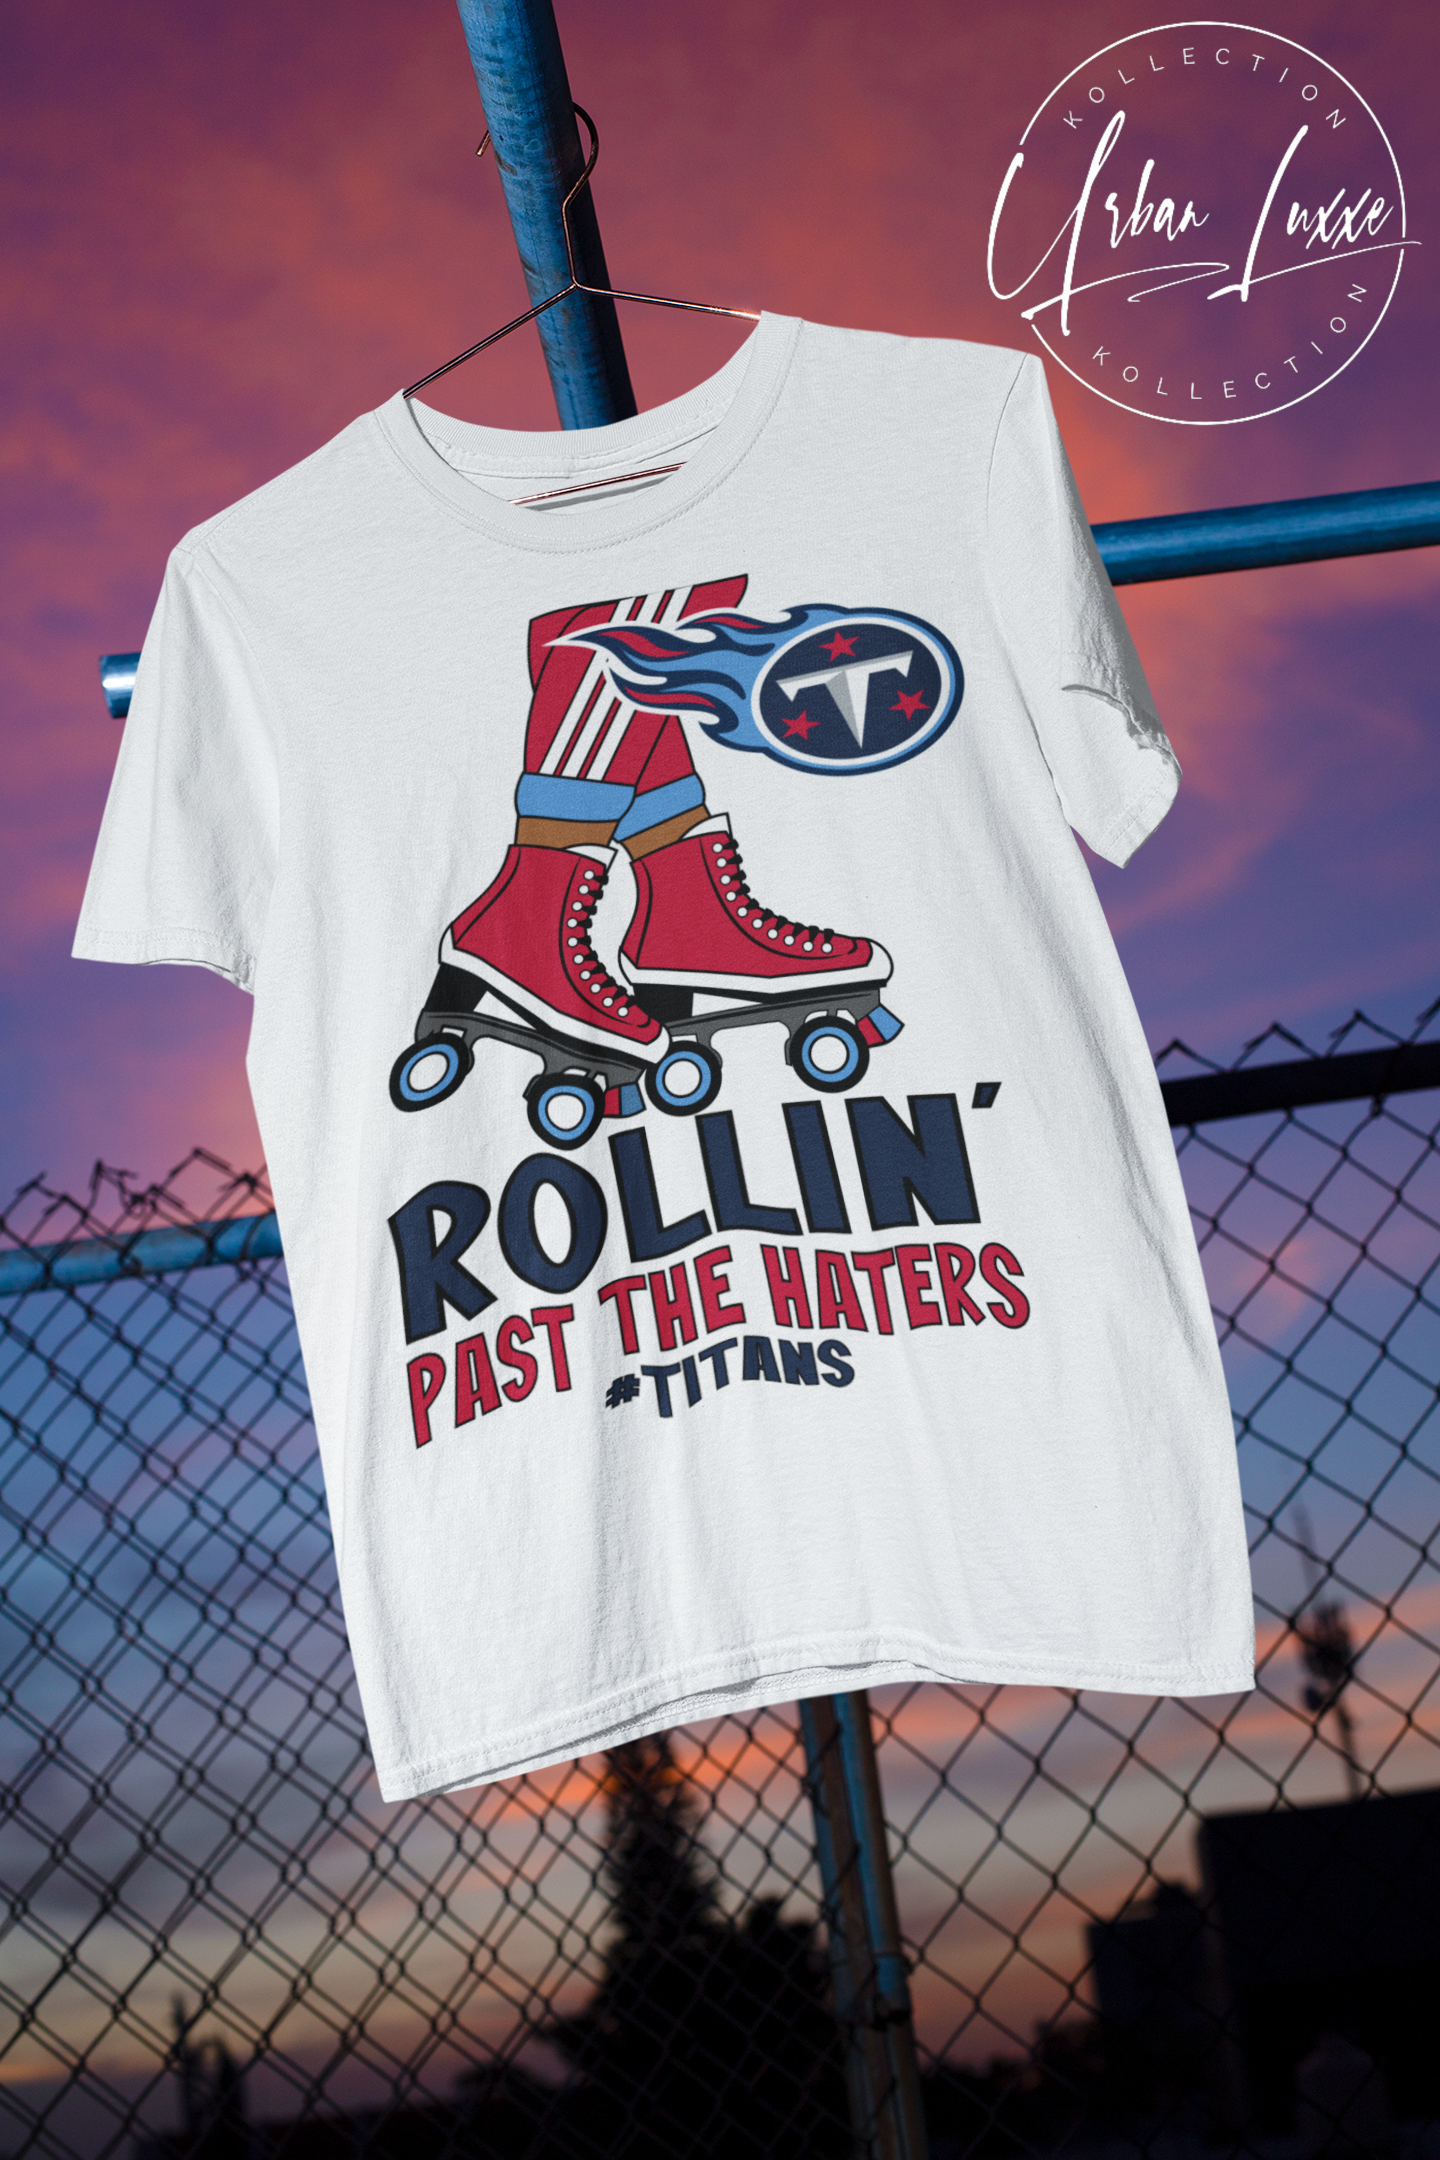 Rollin’ Past The Haters Tennessee Titans T-shirt